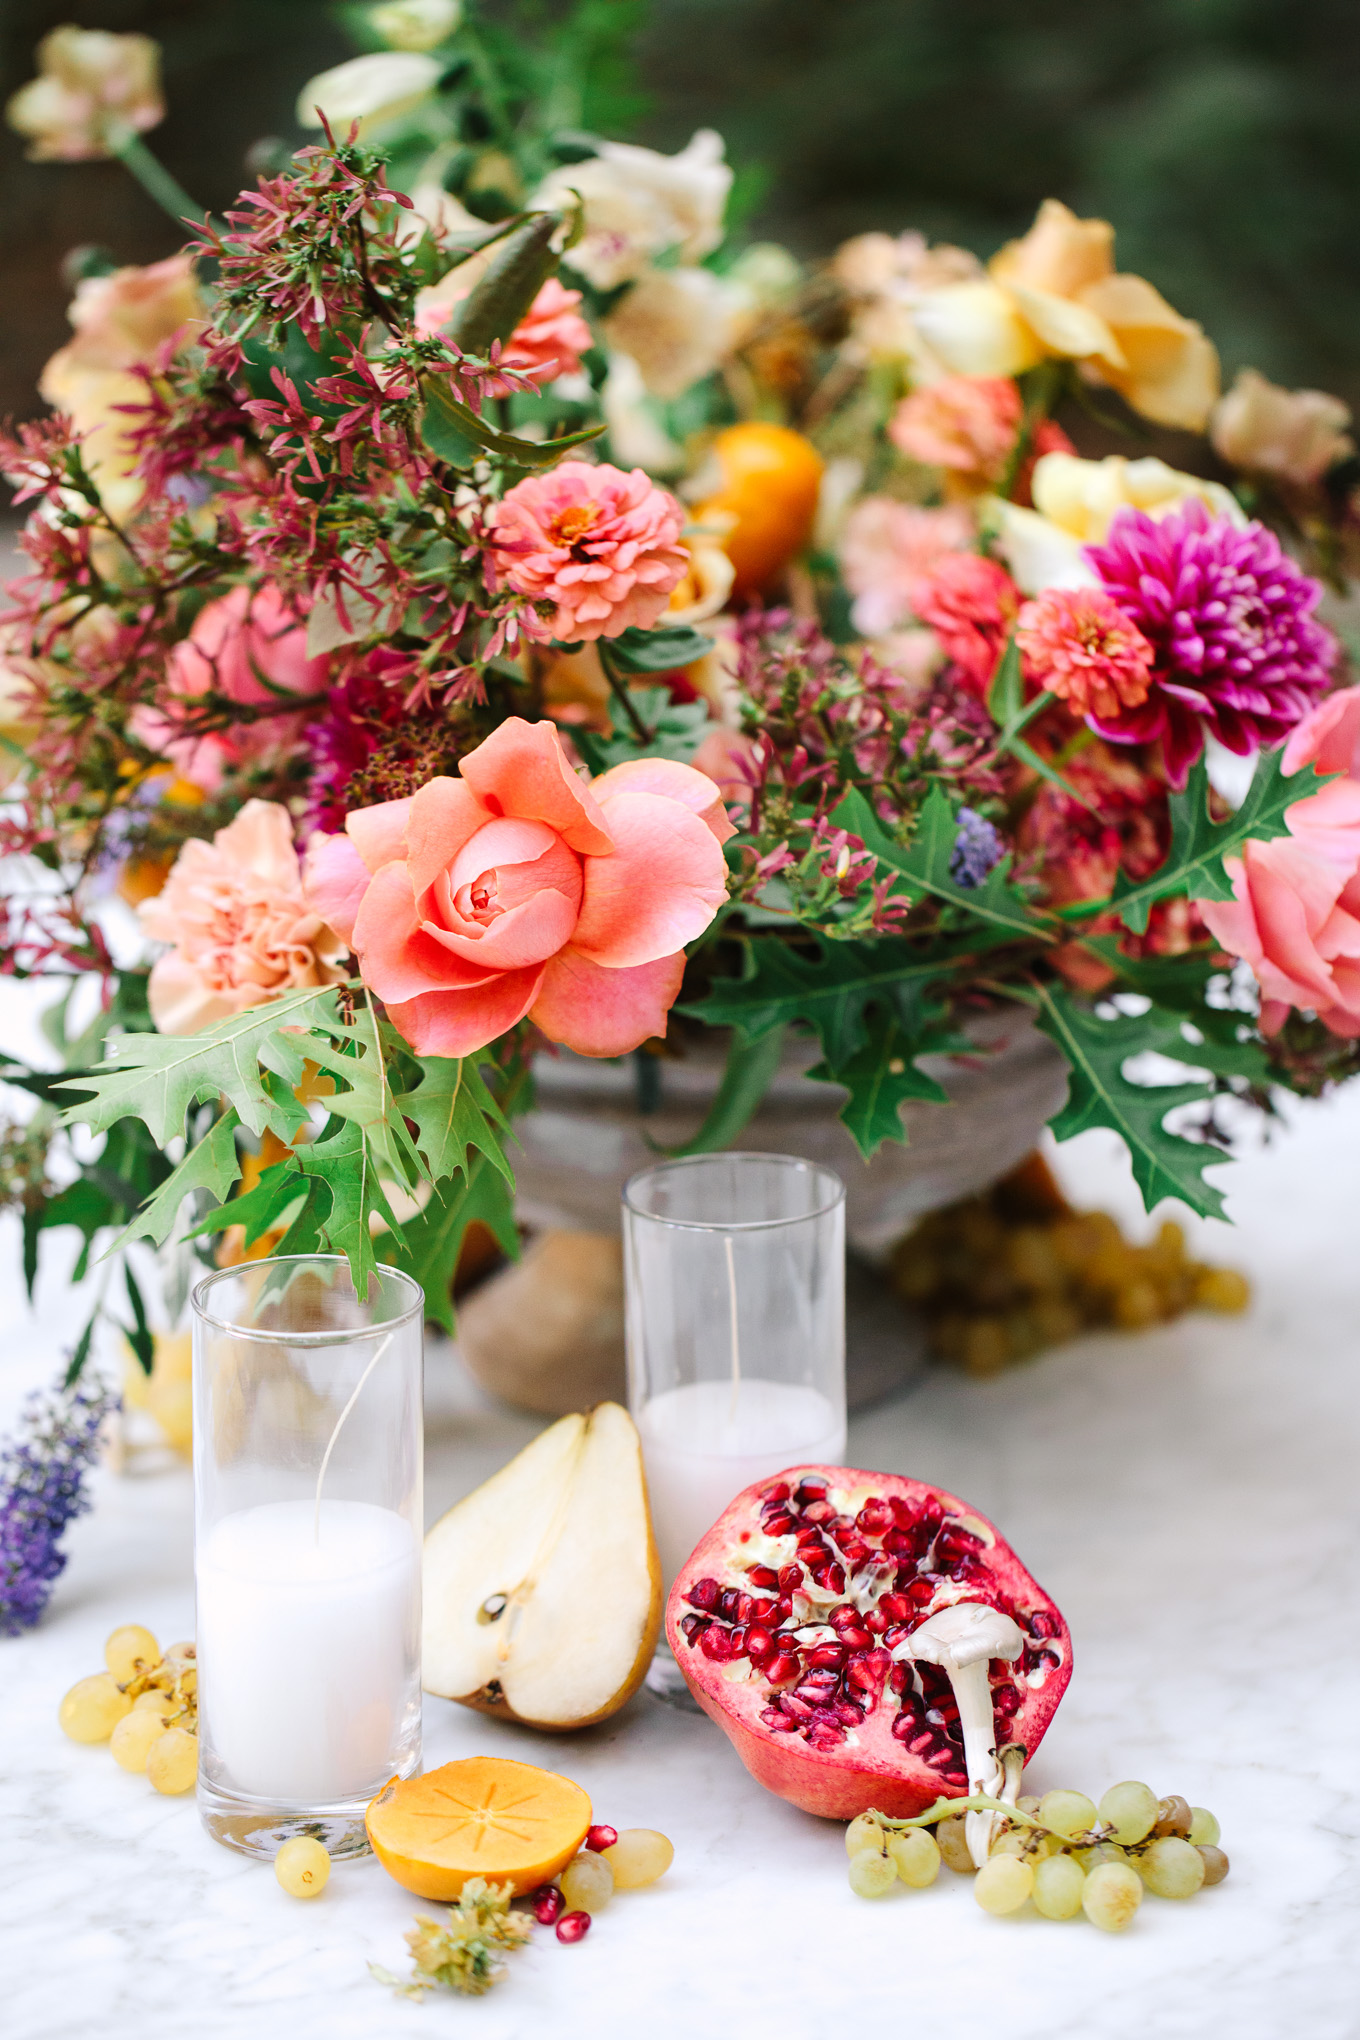 Lush table with fruit and mushrooms at Redbird Los Angeles wedding | Best Southern California Garden Wedding Venues | Colorful and elevated wedding photography for fun-loving couples | #gardenvenue #weddingvenue #socalweddingvenue #bouquetideas #uniquebouquet   Source: Mary Costa Photography | Los Angeles 